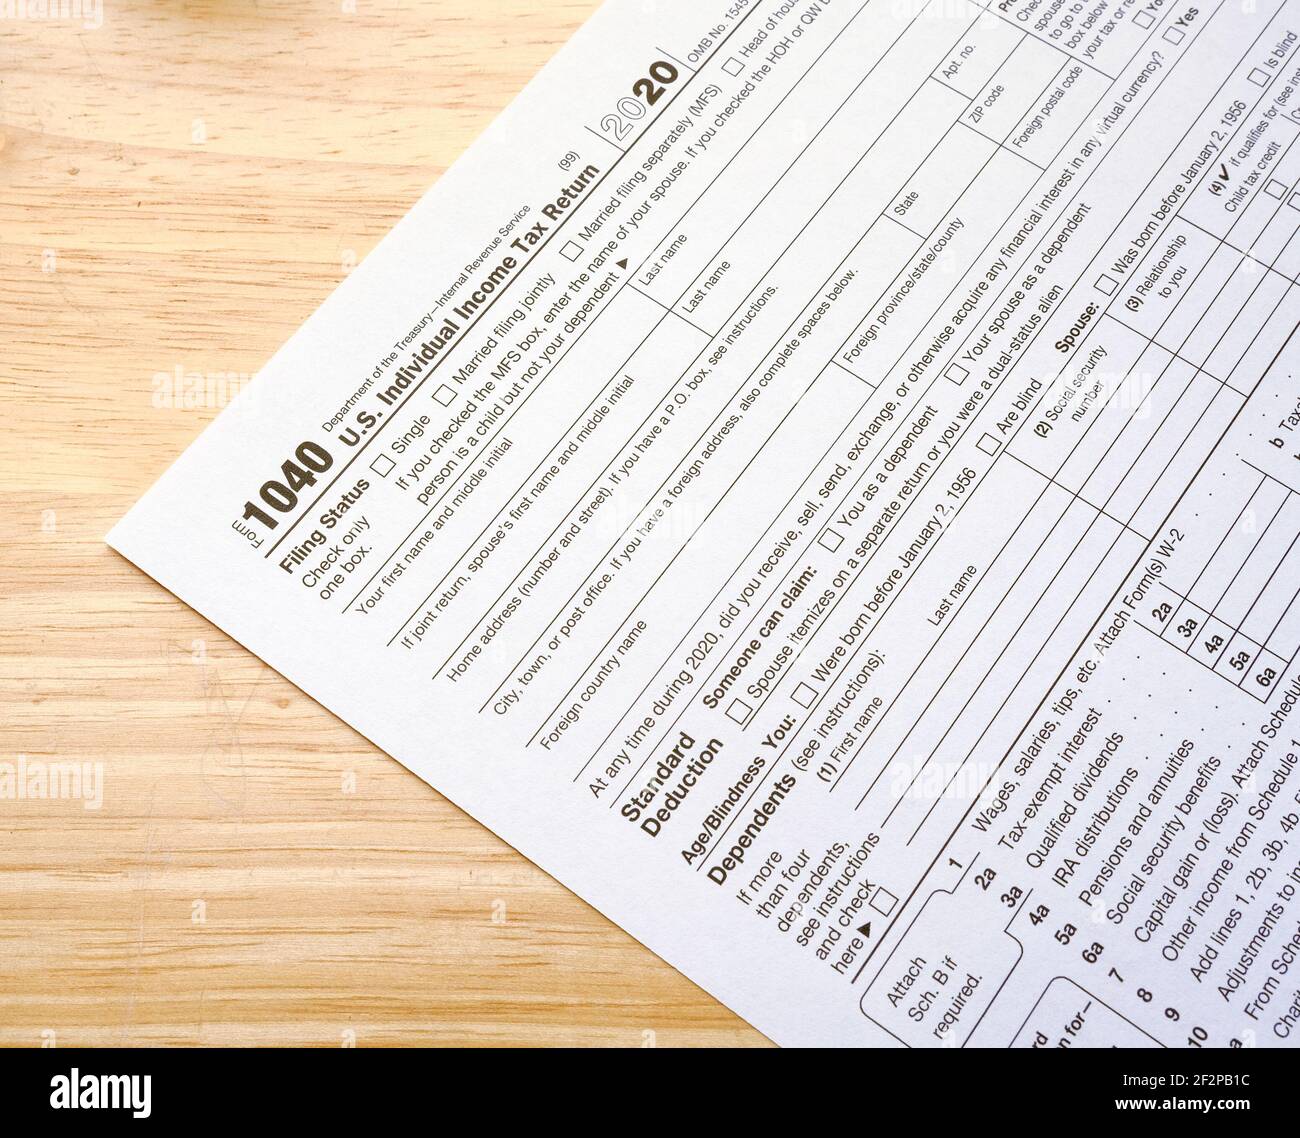 Blank 1040 Tax Form on Wood Table Stock Photo